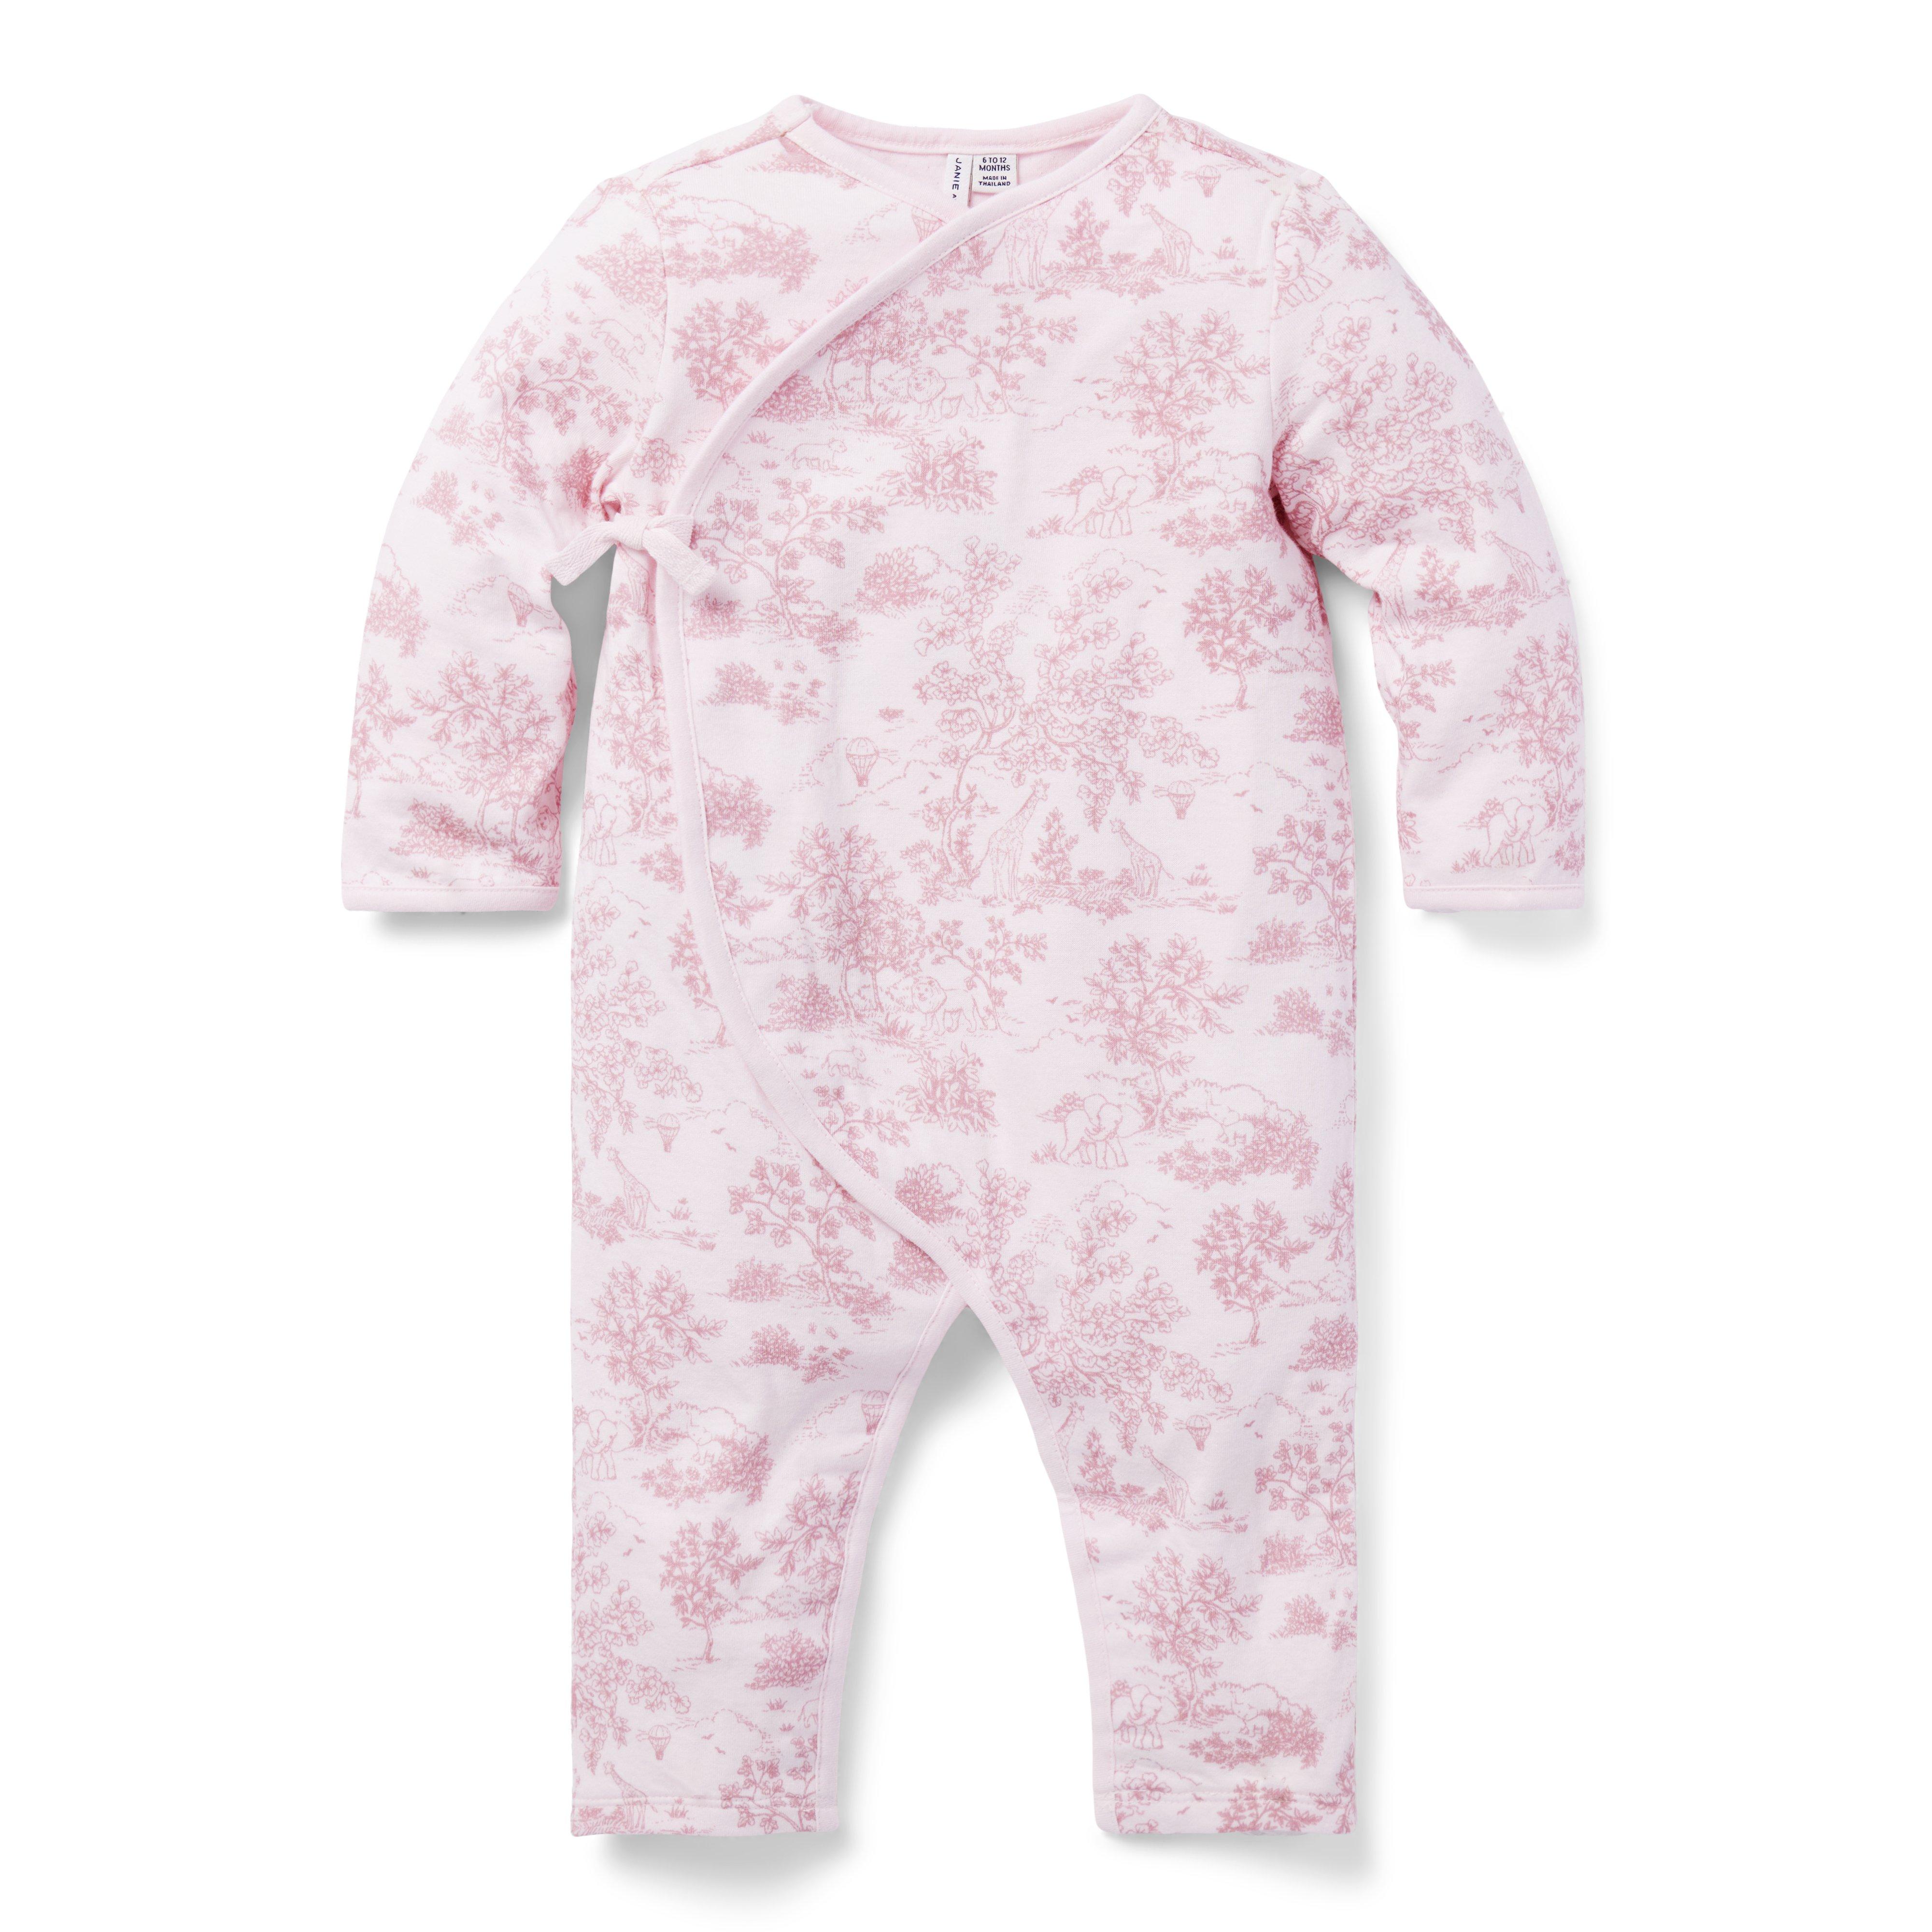 Newborn Baby Girl One-Pieces at Janie and Jack